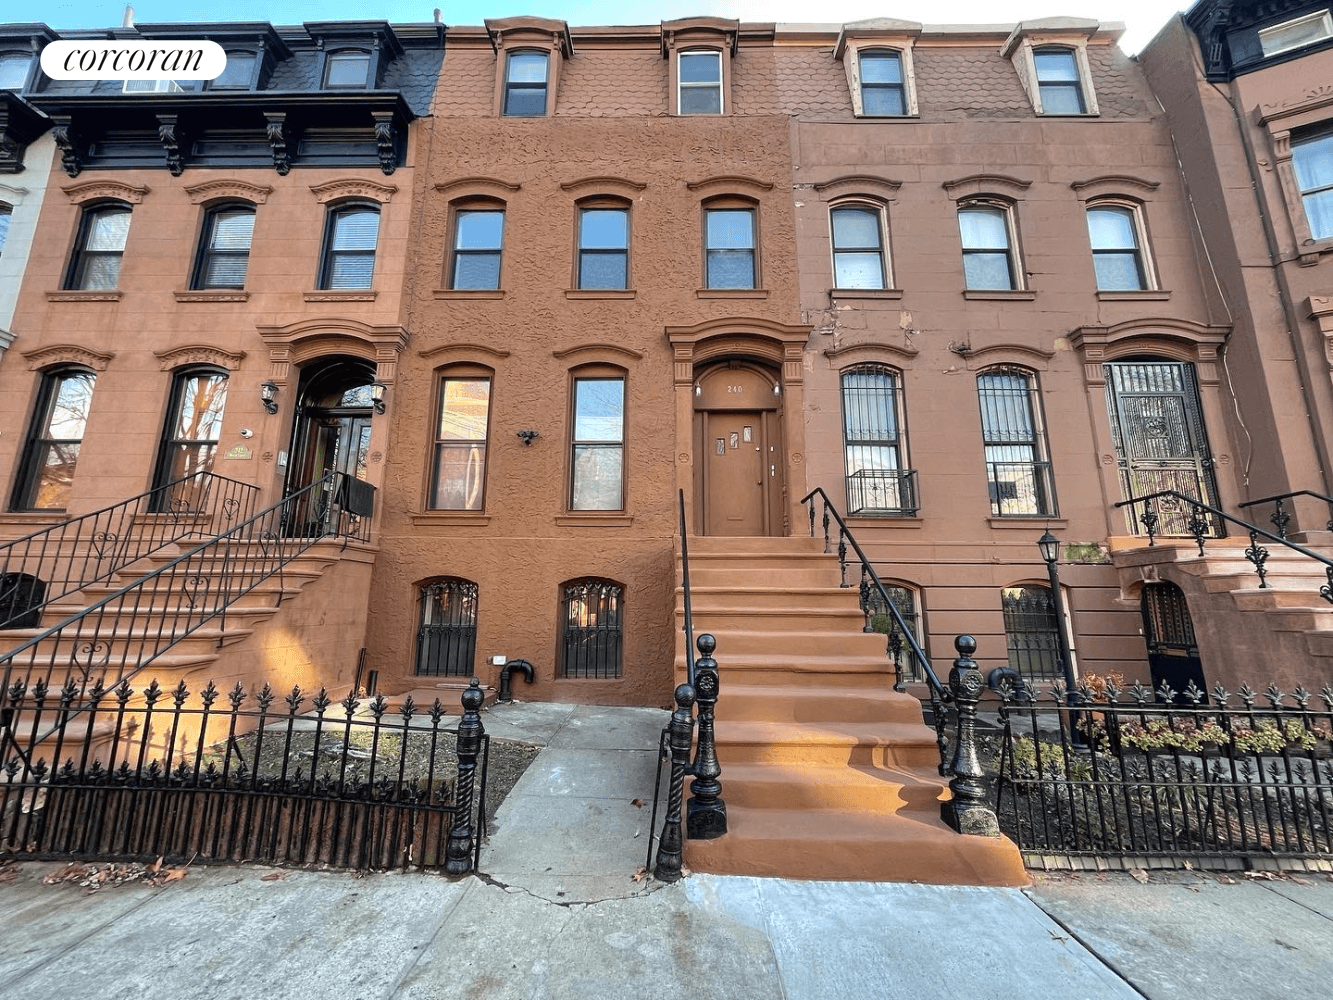 Welcome to 240 Macon Street located in the heart of Brooklyn's most culturally rich and historic neighborhood Bedford Stuyvesant.